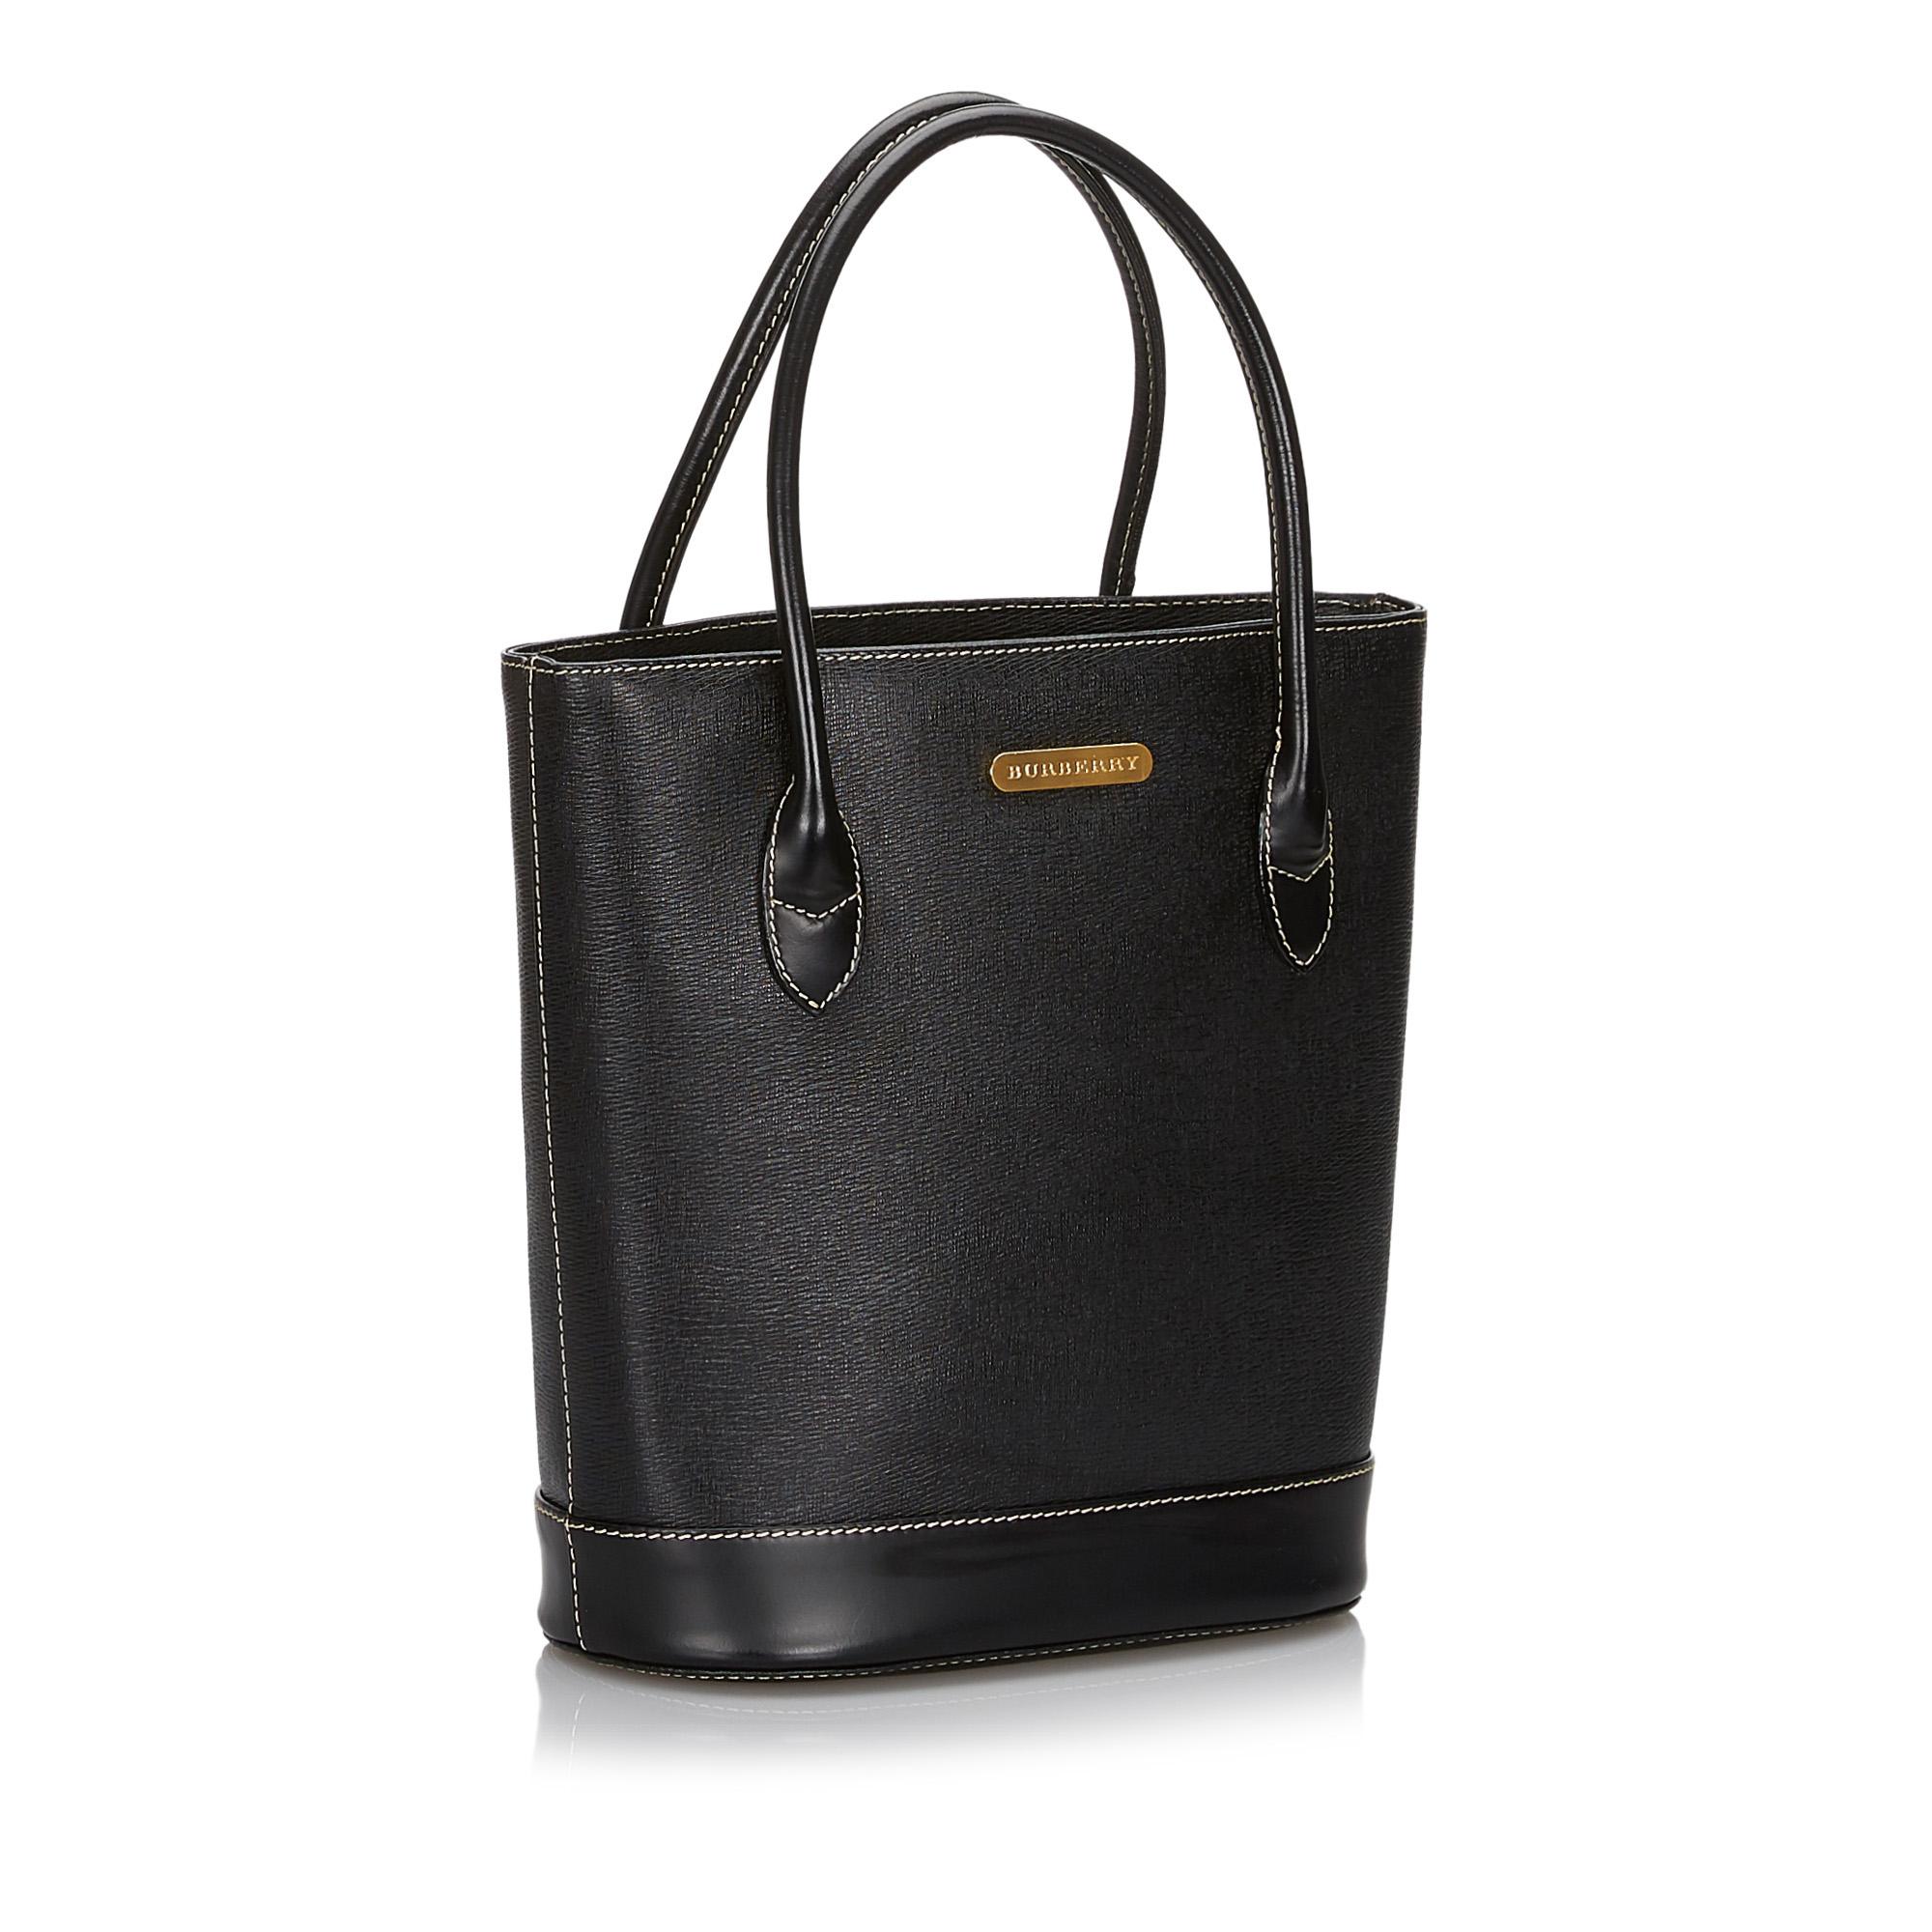 This tote bag features a leather body, rolled handles, an open top, an interior zip compartment, and interior slip pockets. It carries as AB condition rating.

Inclusions: 
This item does not come with inclusions.

Dimensions:
Length: 25.00